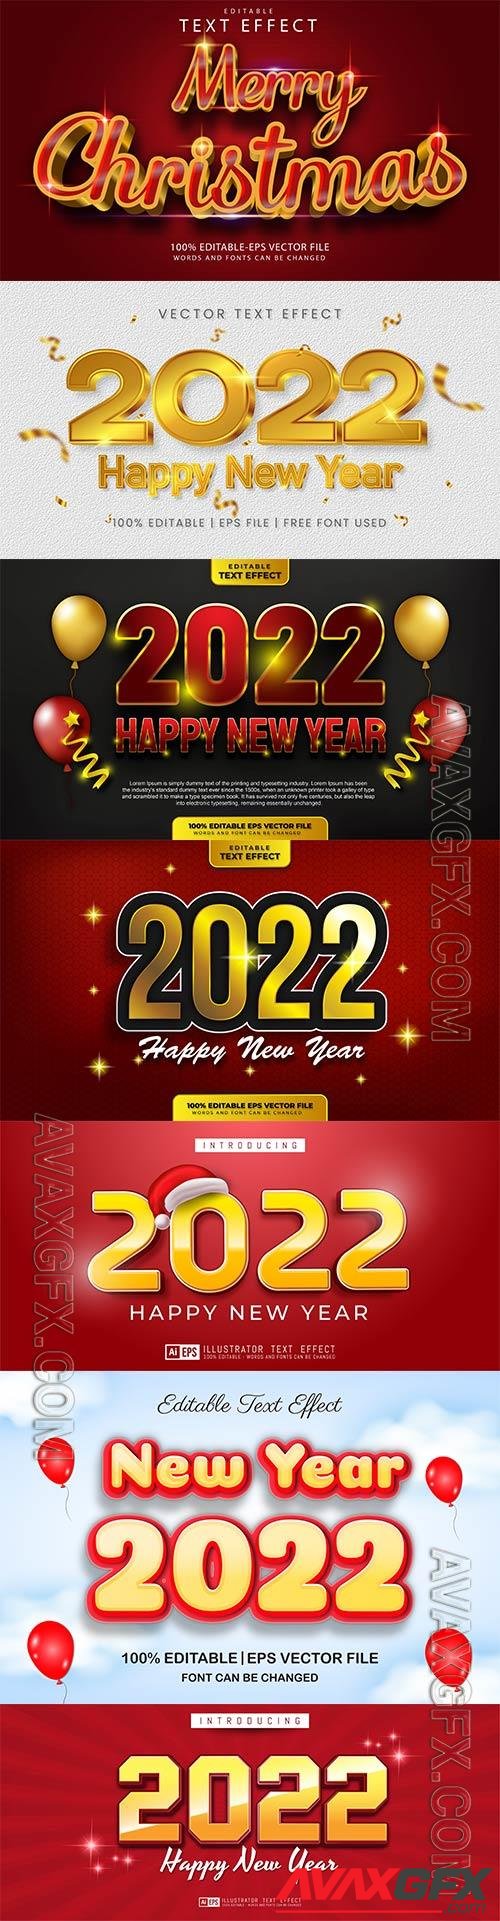 Merry christmas and happy new year 2022 editable vector text effects vol 10